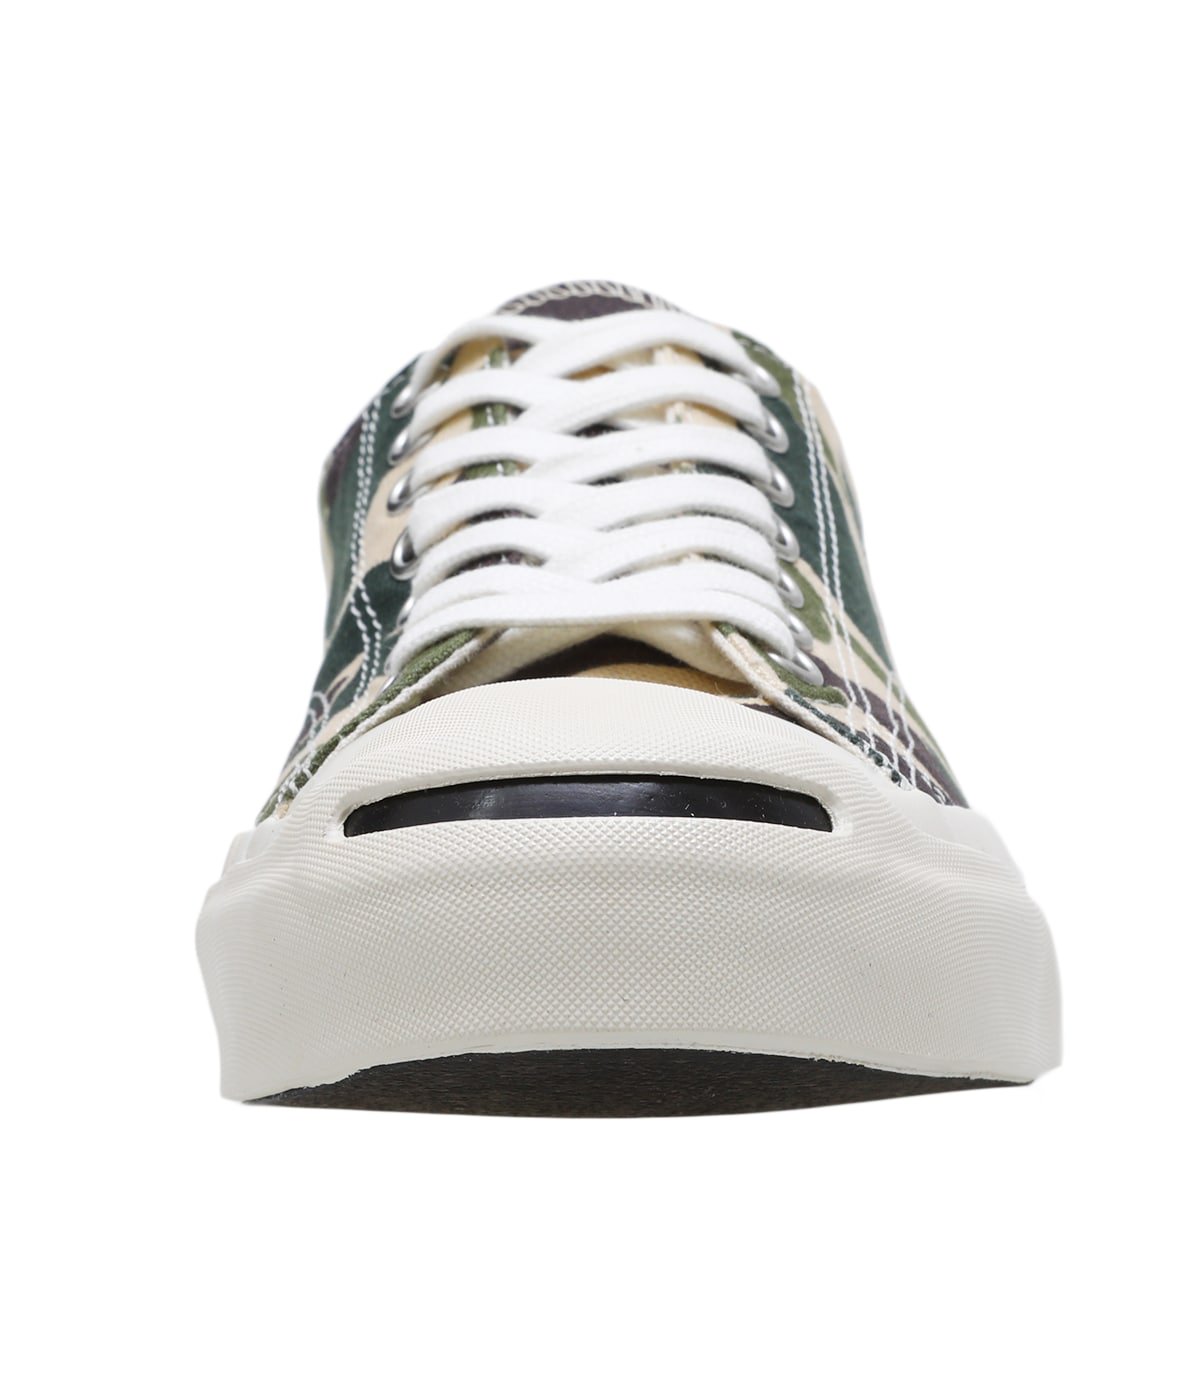 JACK PURCELL US 83CAMO